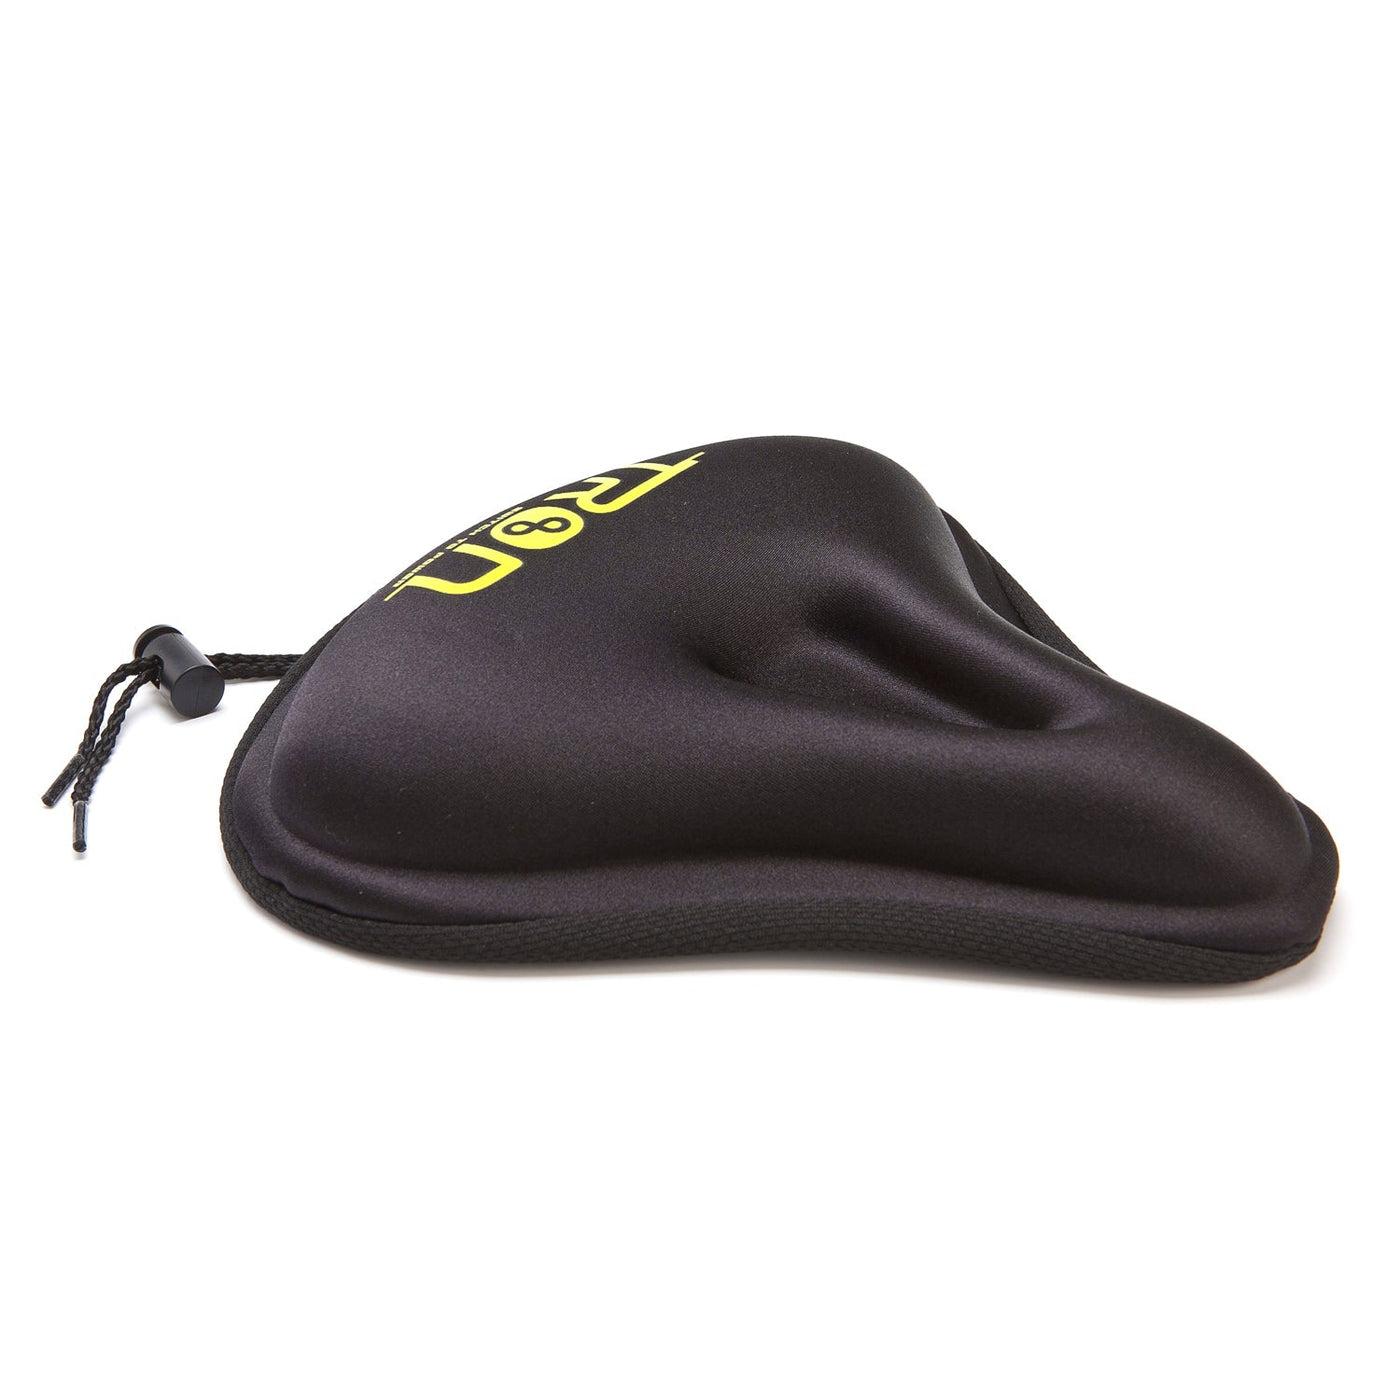 Tron Bicycle Gel Saddle Cover 229-254 X 216-241Mm VSA20-VLC043 - Cyclop.in